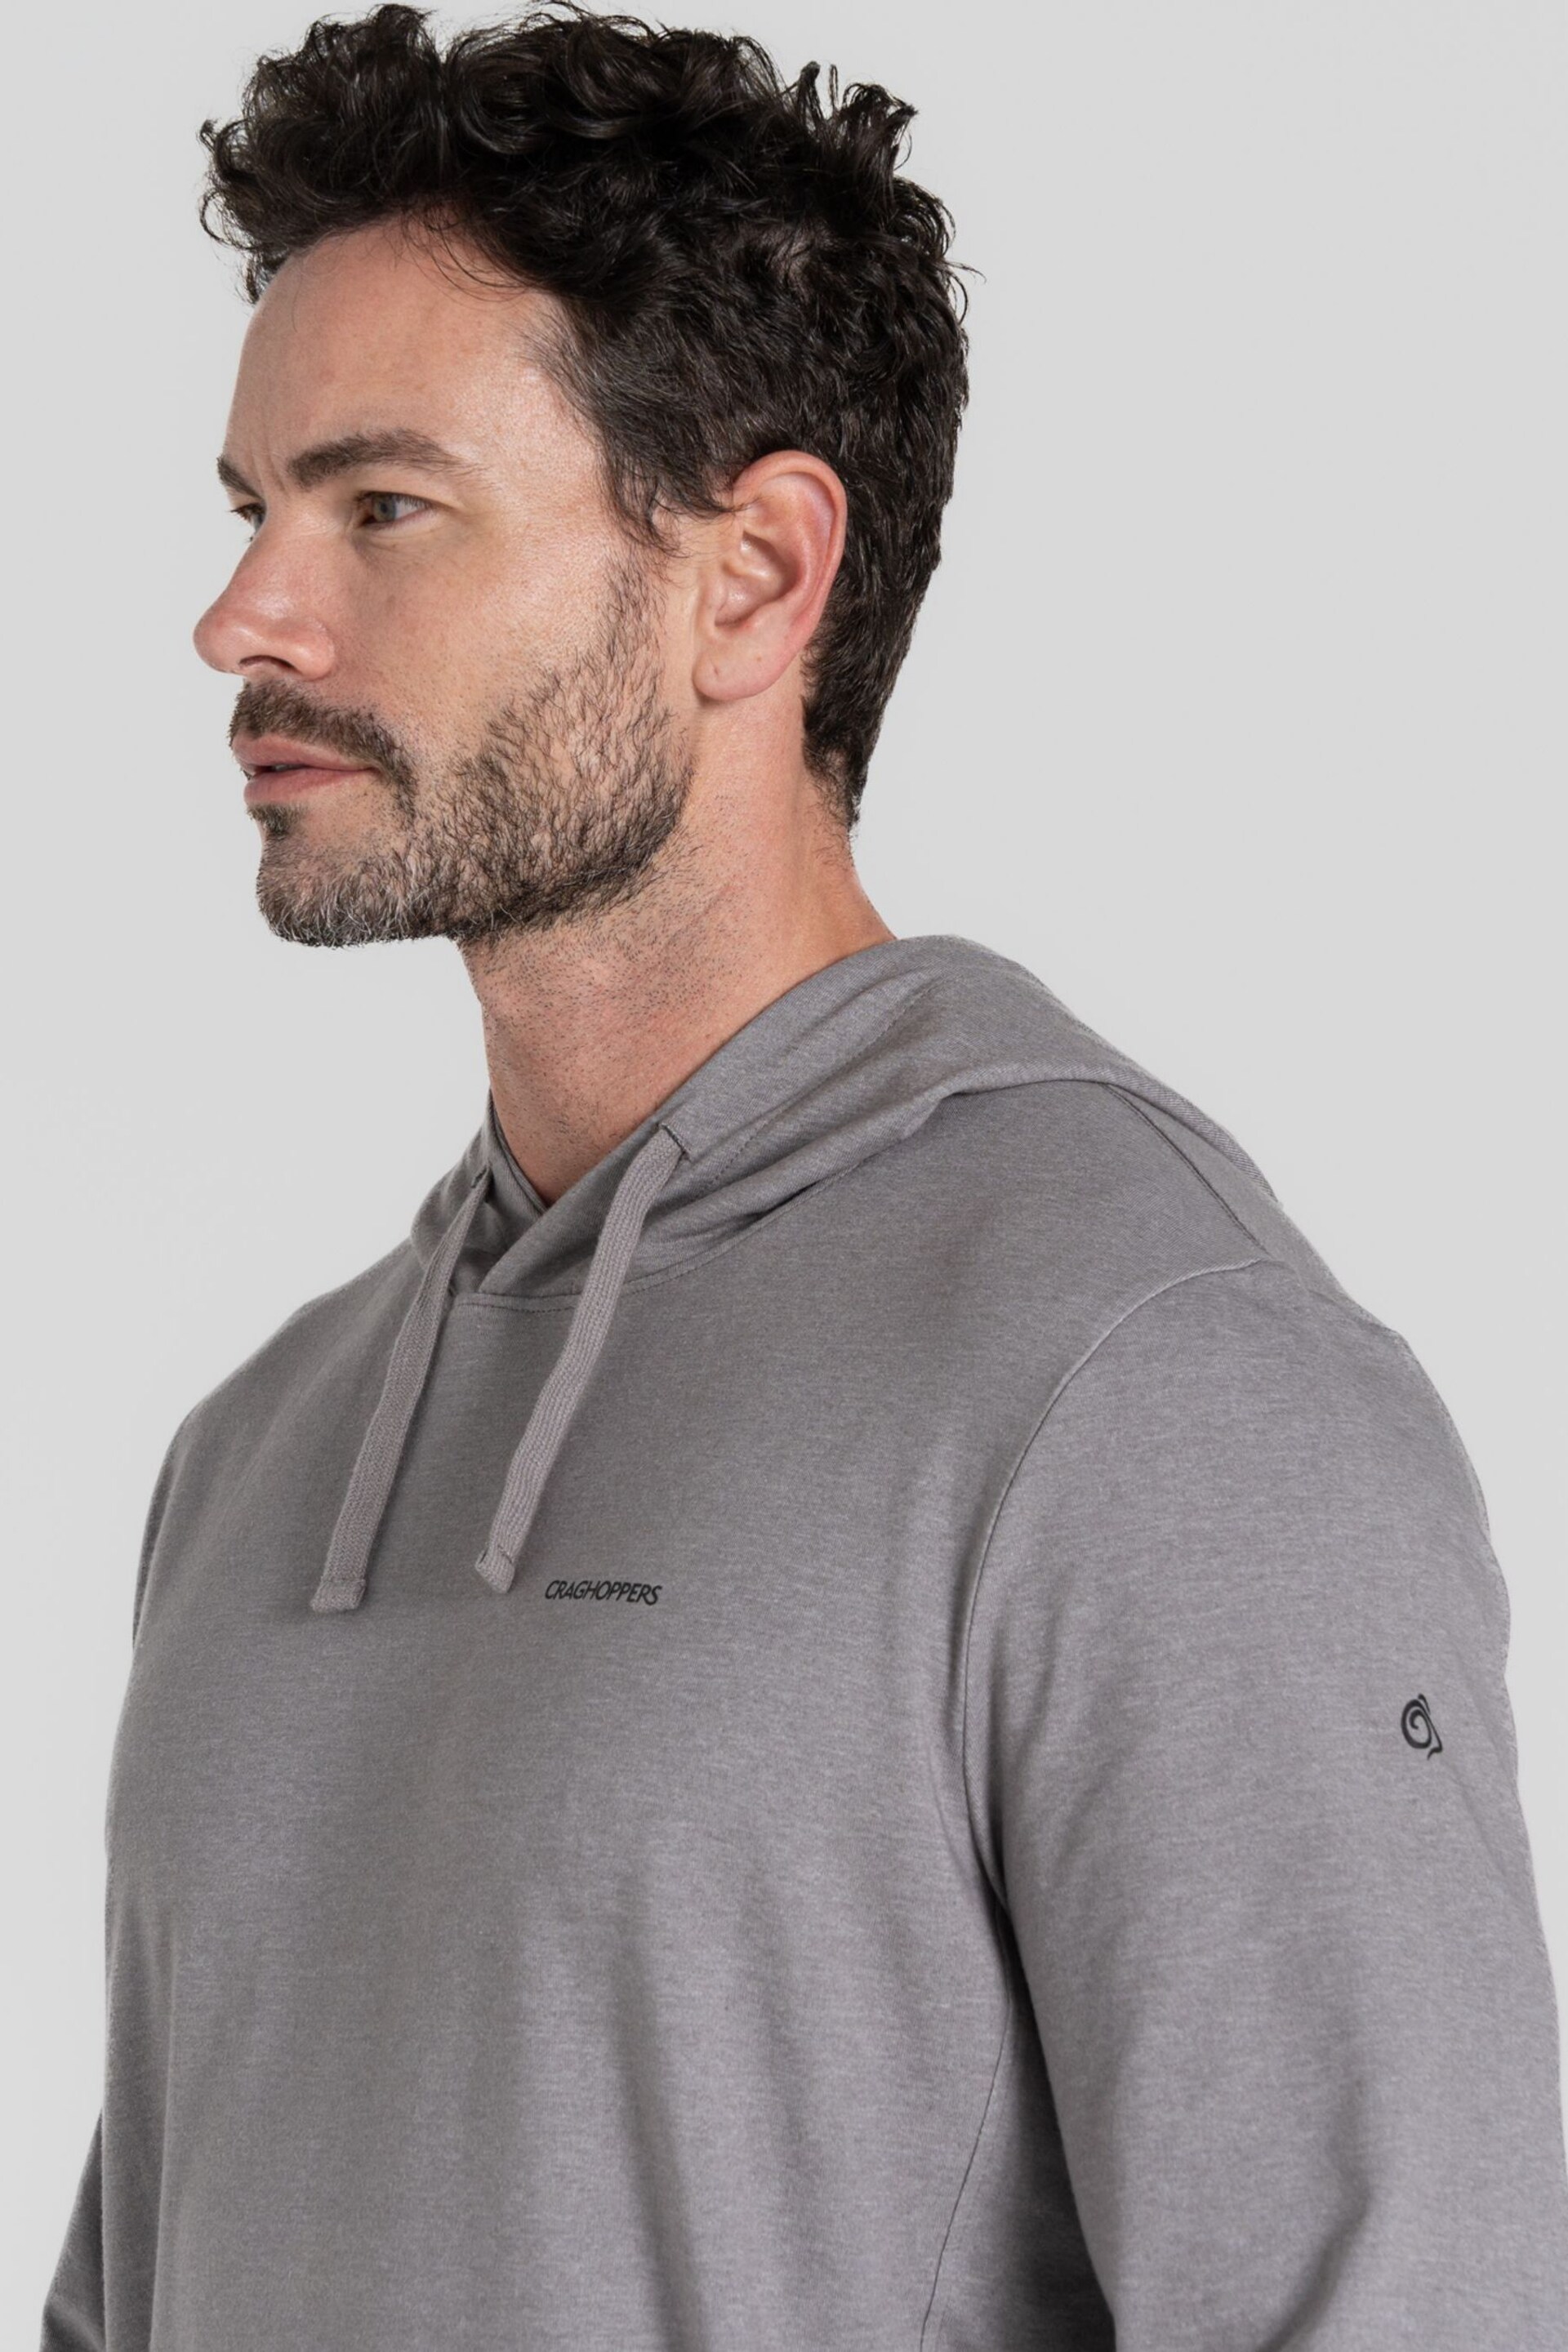 Craghoppers Grey NL Tagus Hooded Top - Image 6 of 7